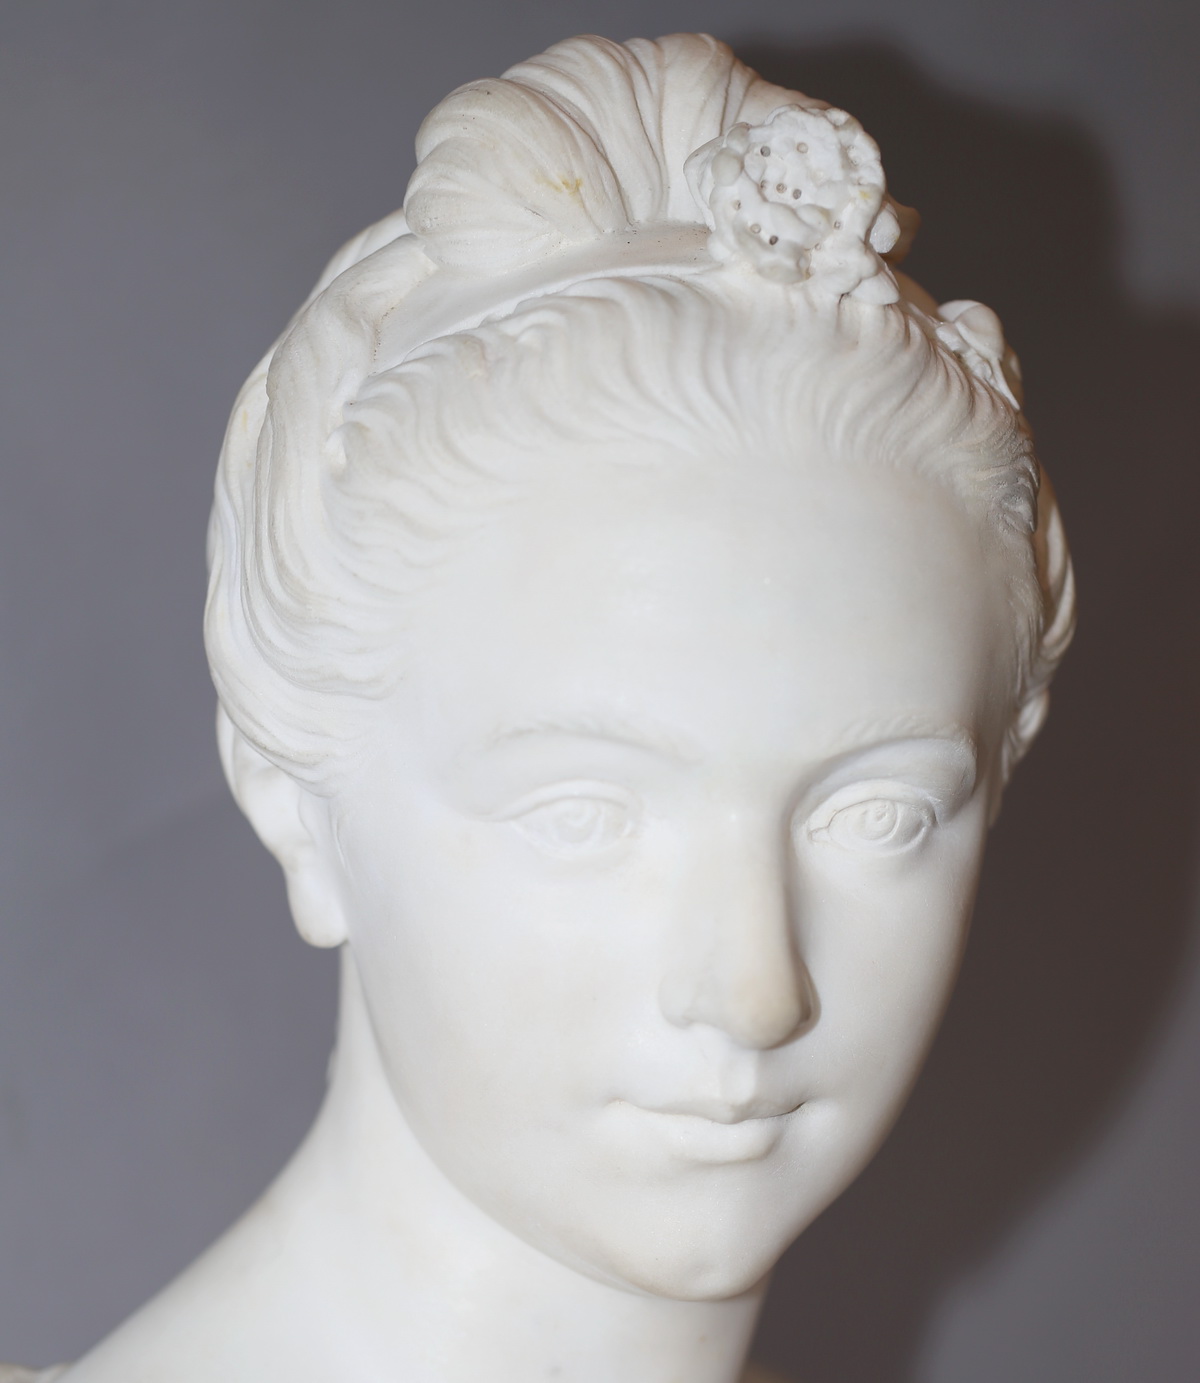 French School of the nineteenth marble bust